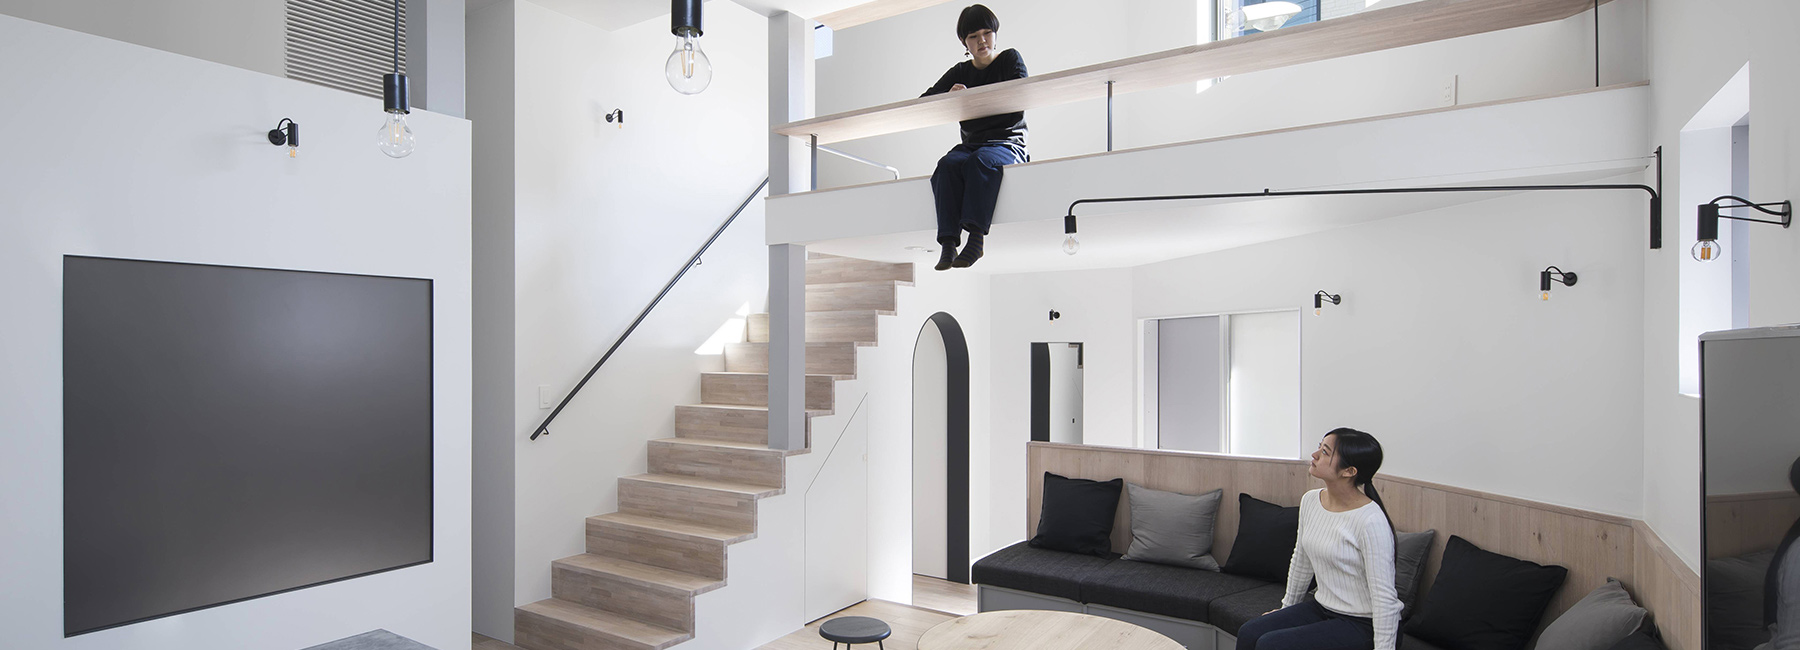 swing designs shared house project with an open feeling within the densely osaka city